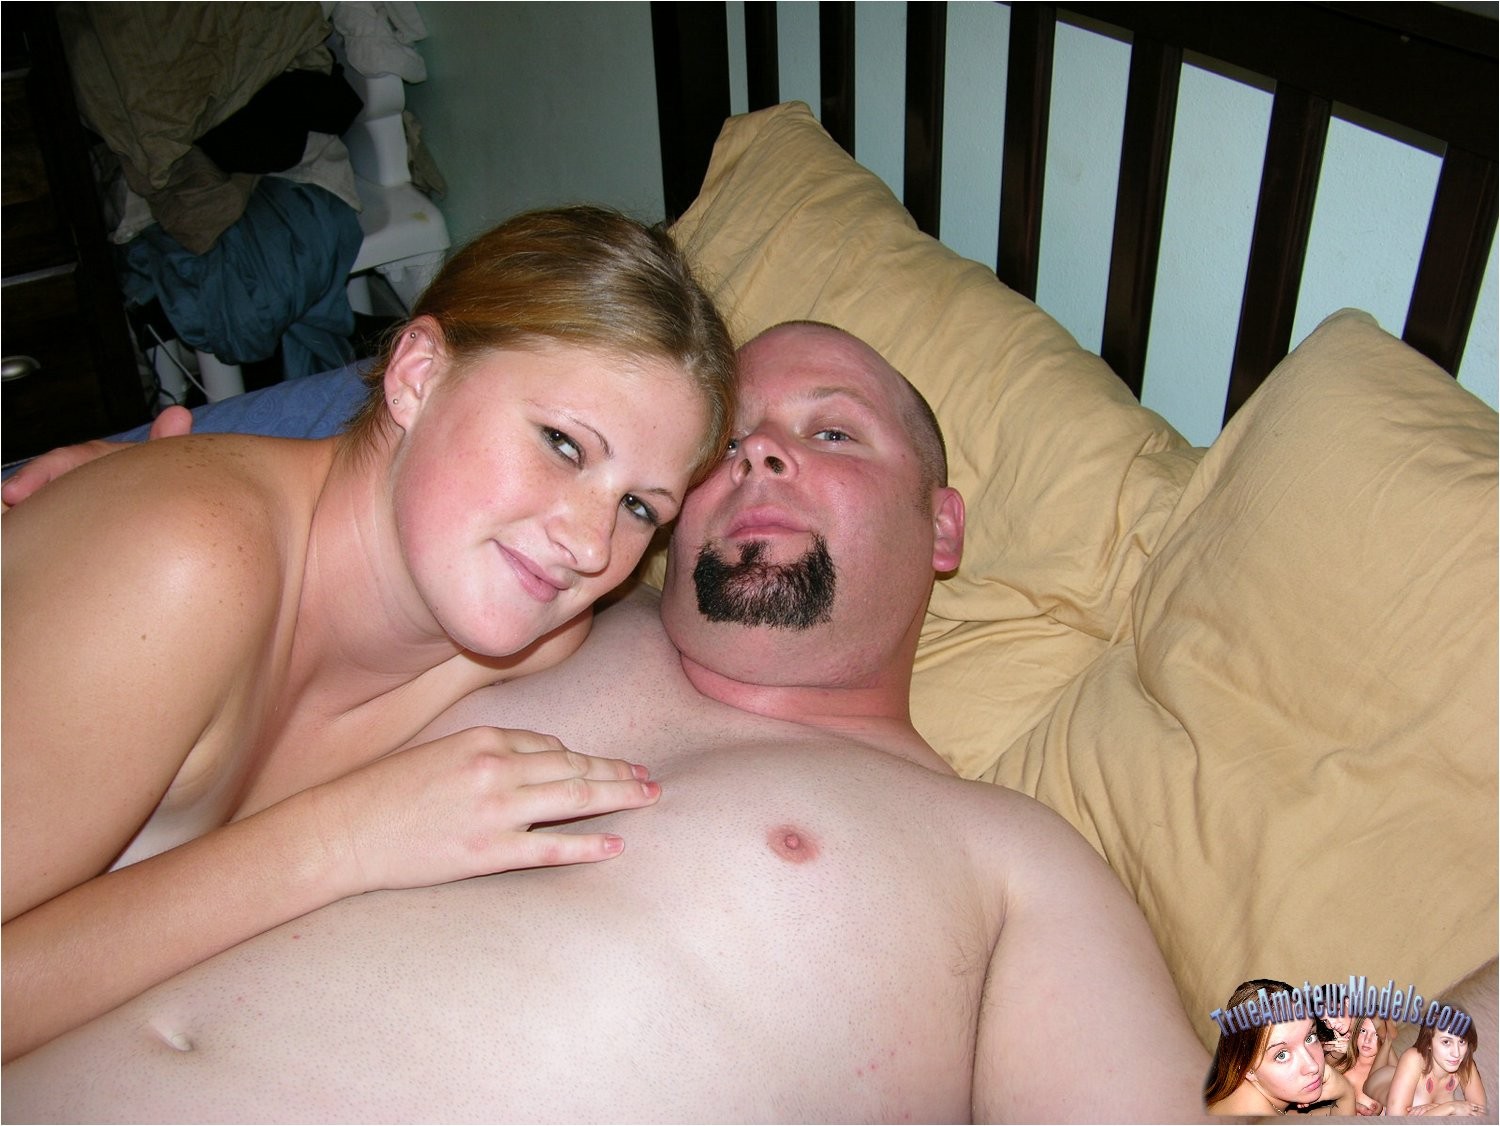 Big And Bald Dude Busts His Load In Blonde Teens Mouth #68273679